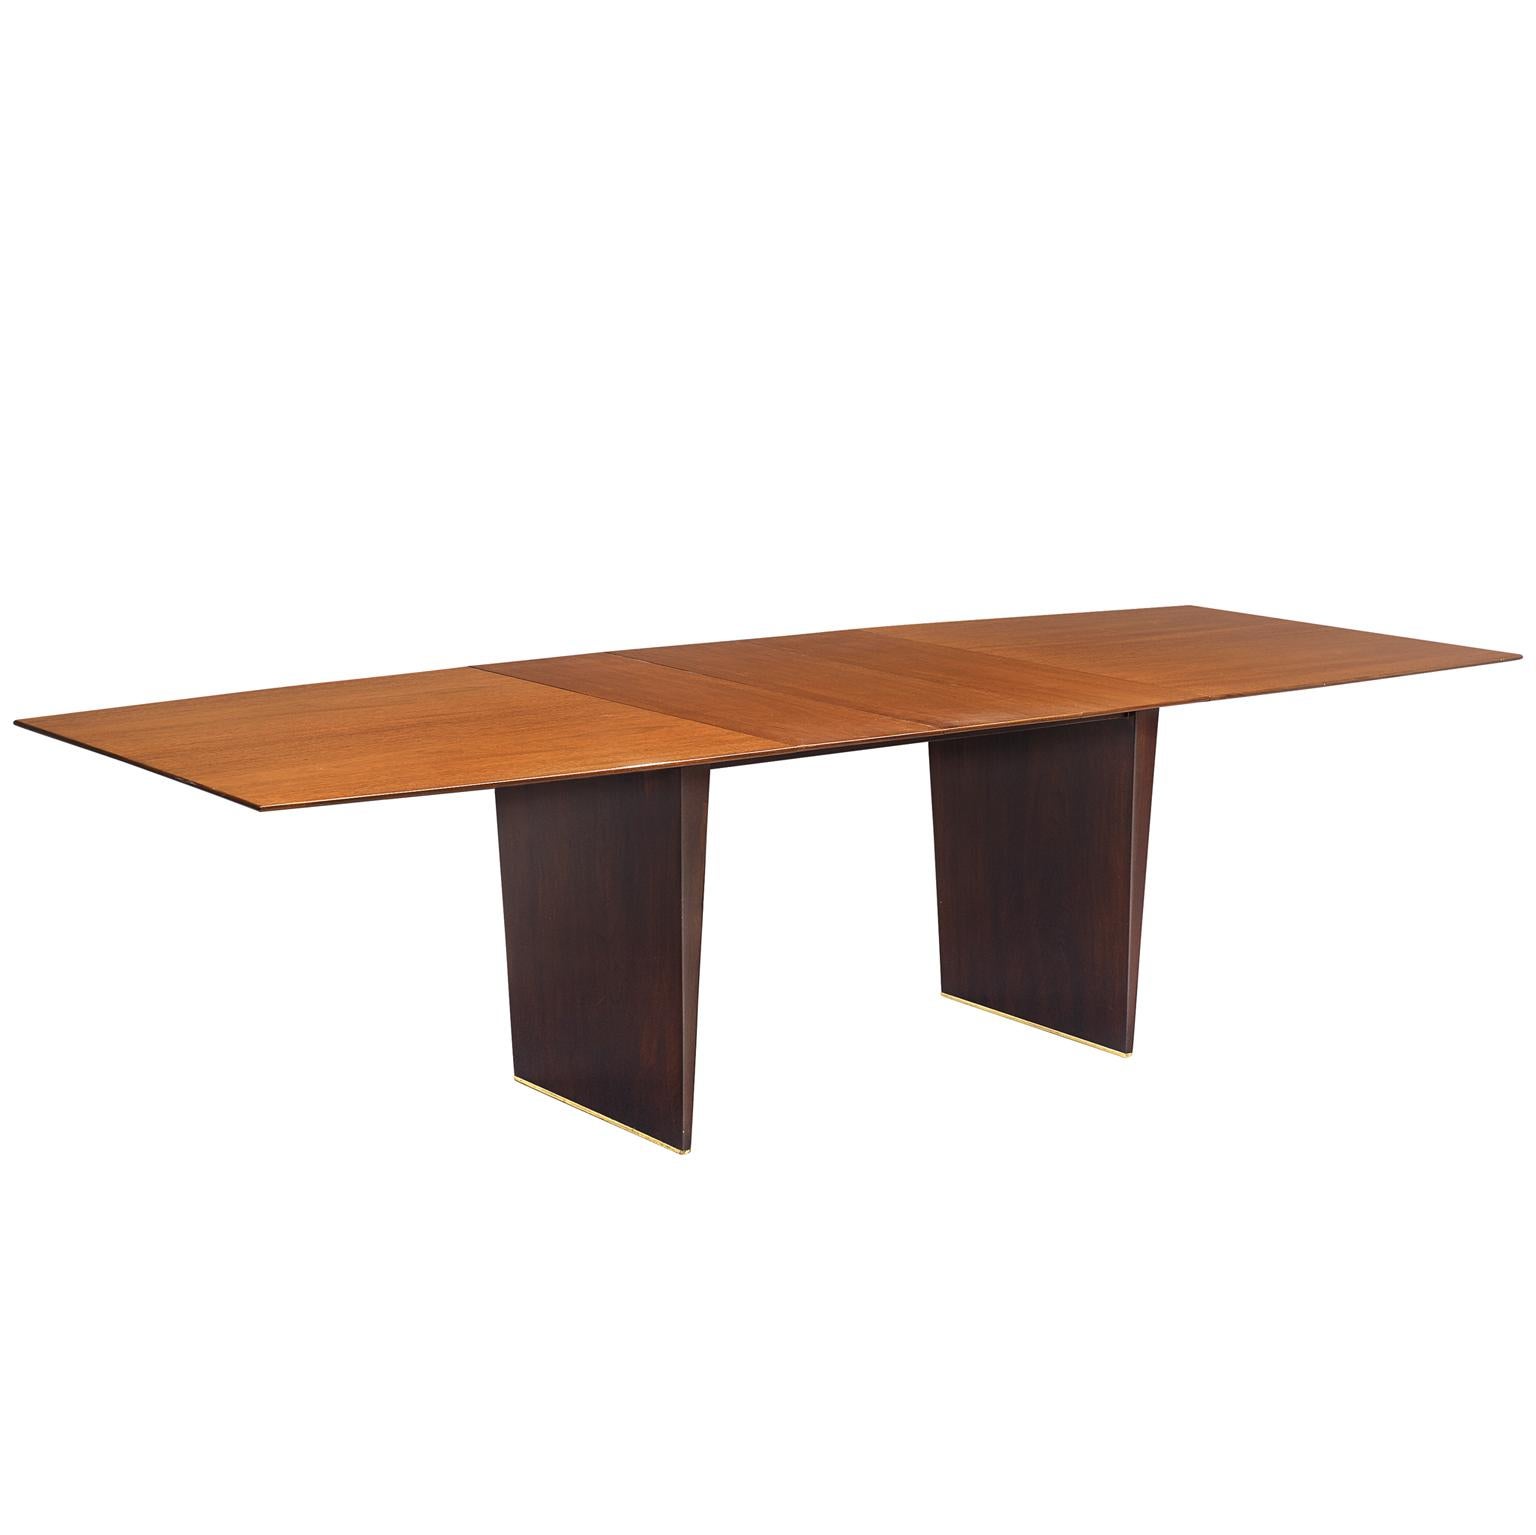 Edward Wormley for Dunbar Extendable Dining Table in Tawi